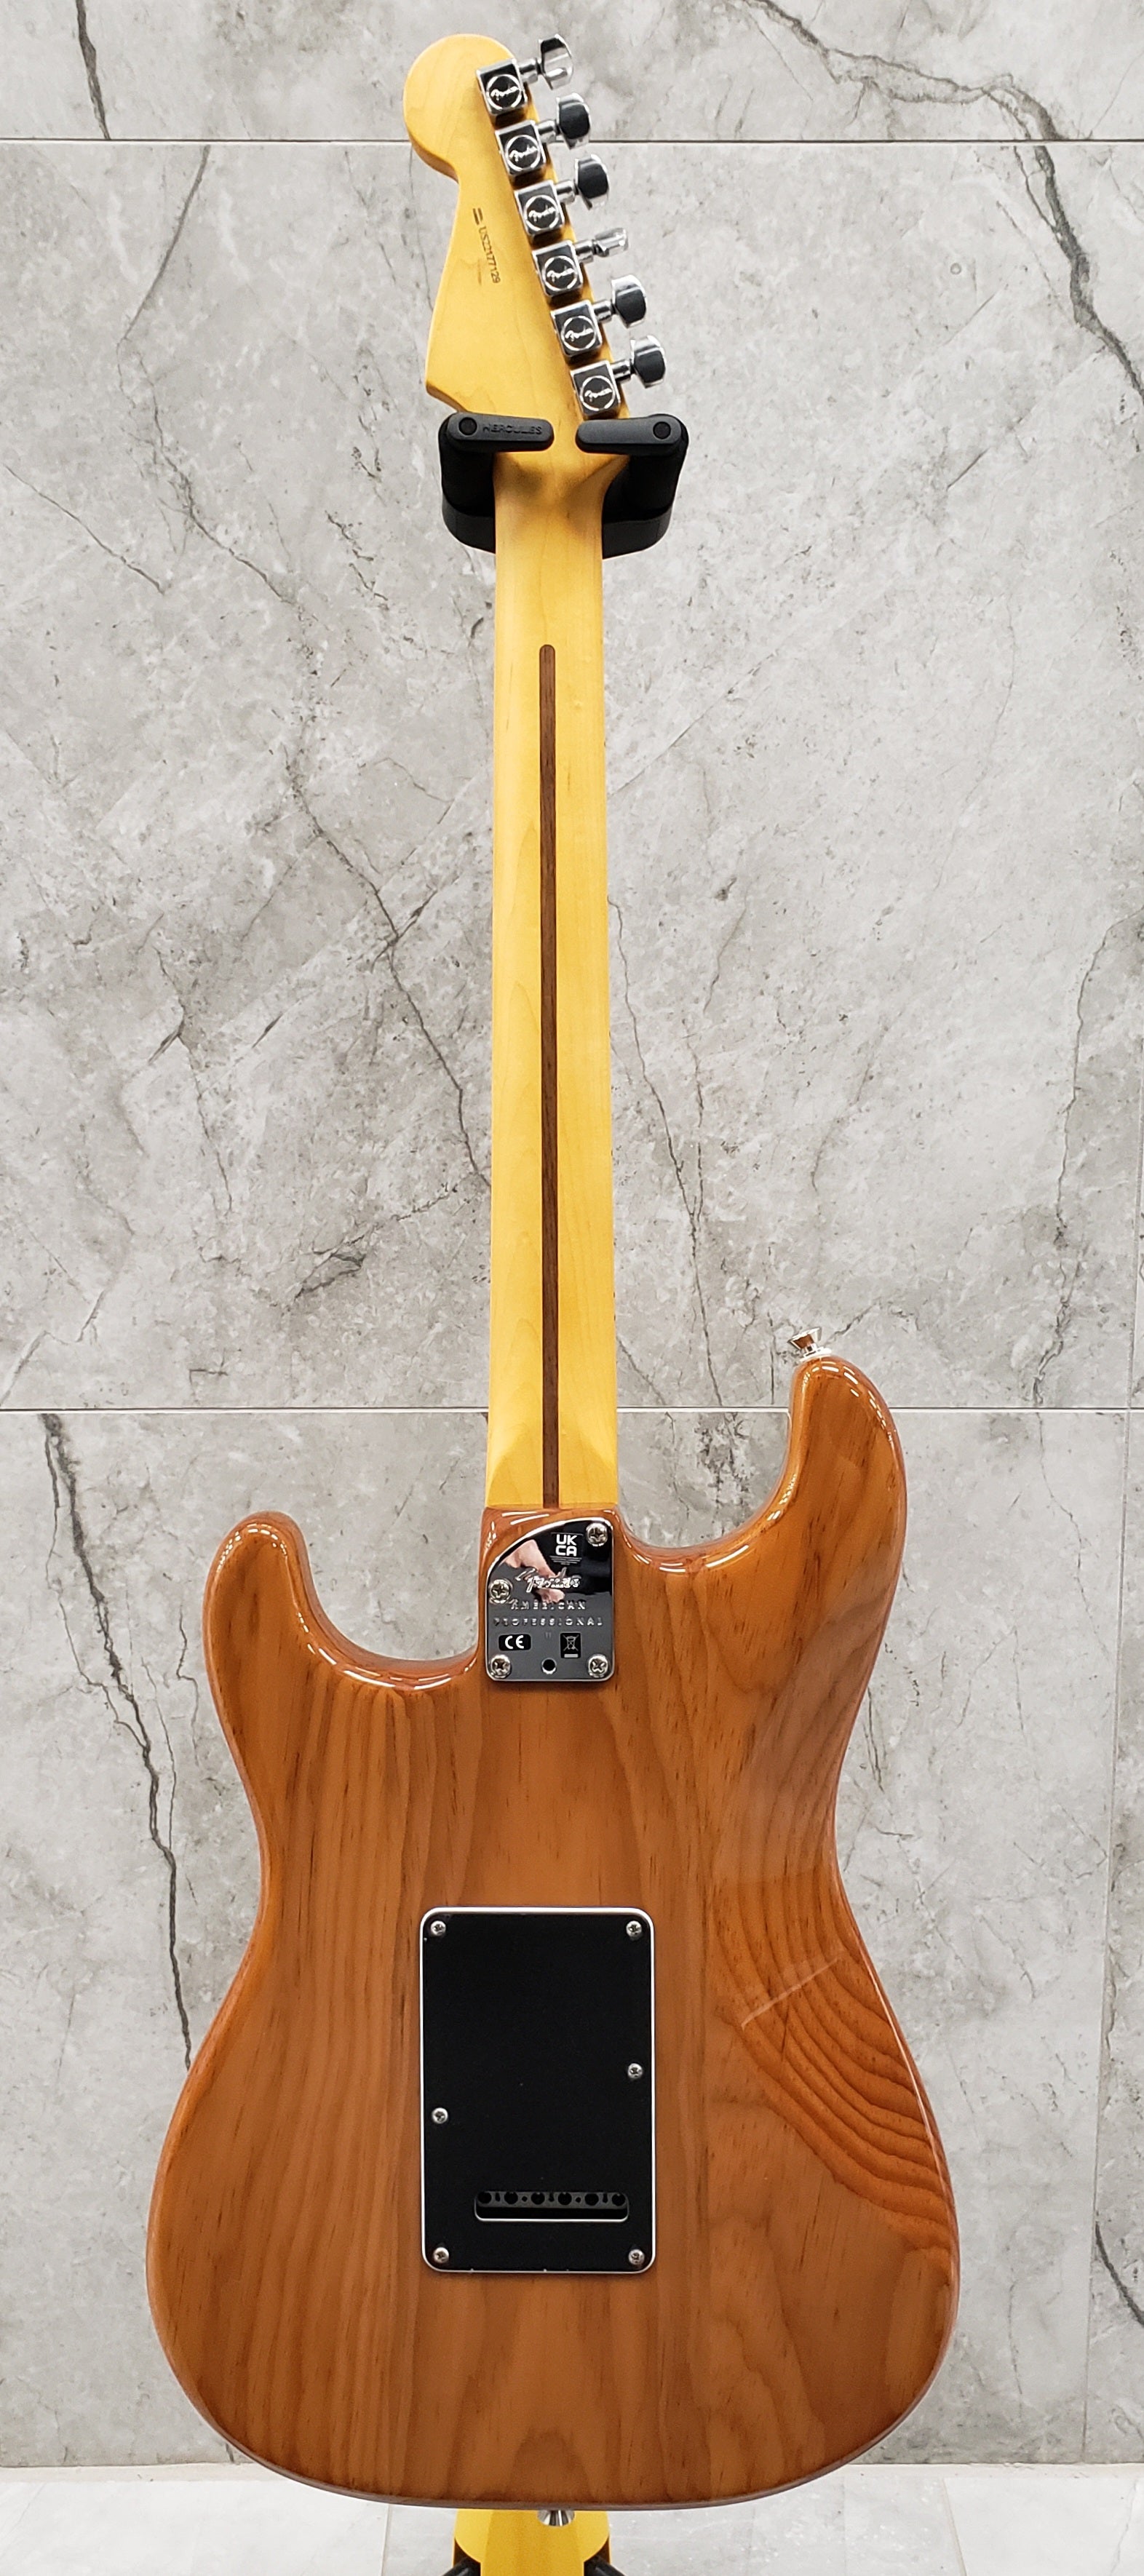 Fender American Professional II Stratocaster HSS Maple Fingerboard Roasted Pine F-0113912763